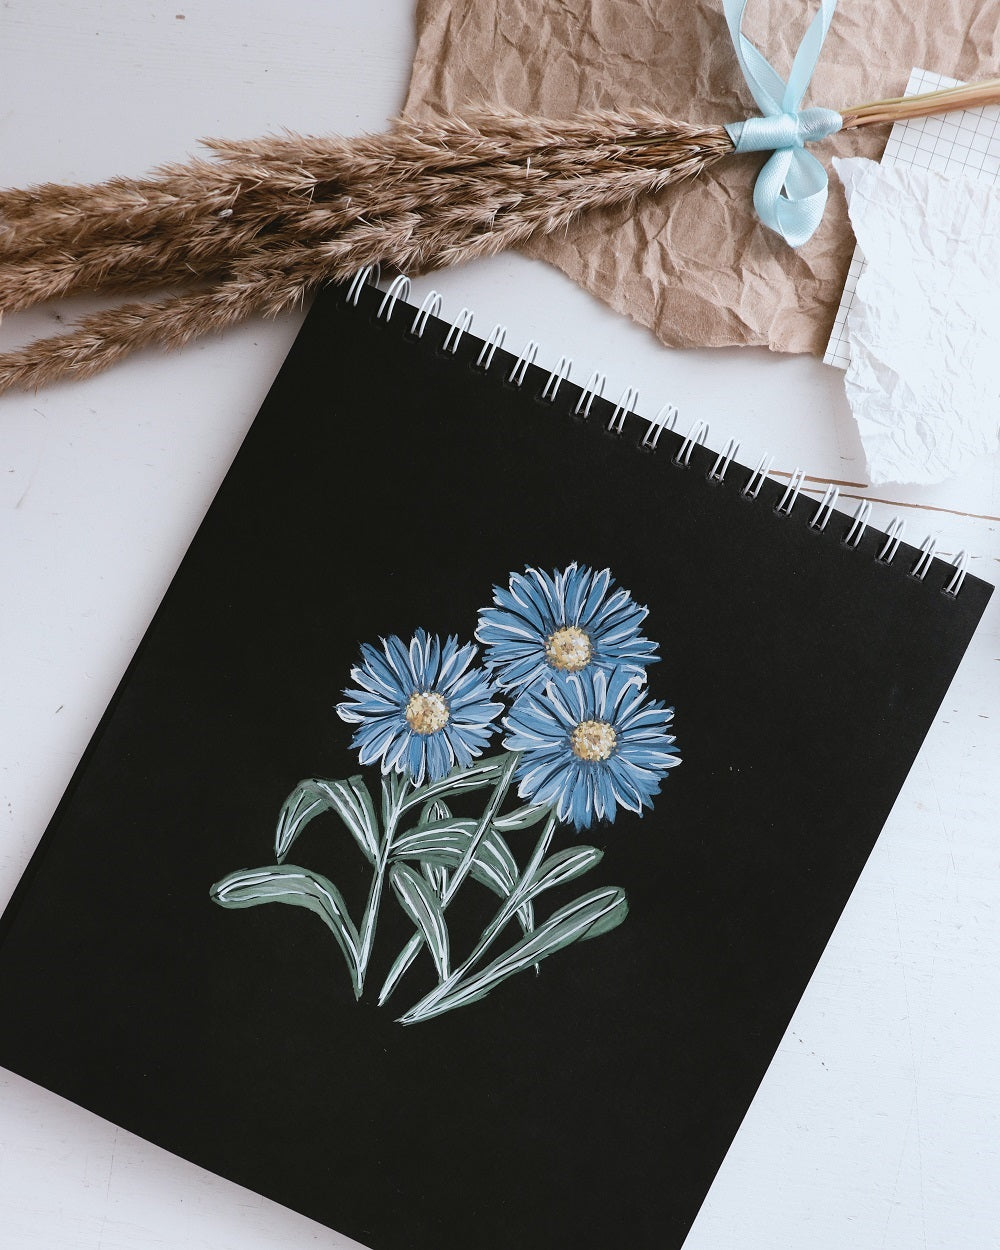 Three blue flowers drawn on a black paper pad in watercolour and gouache.